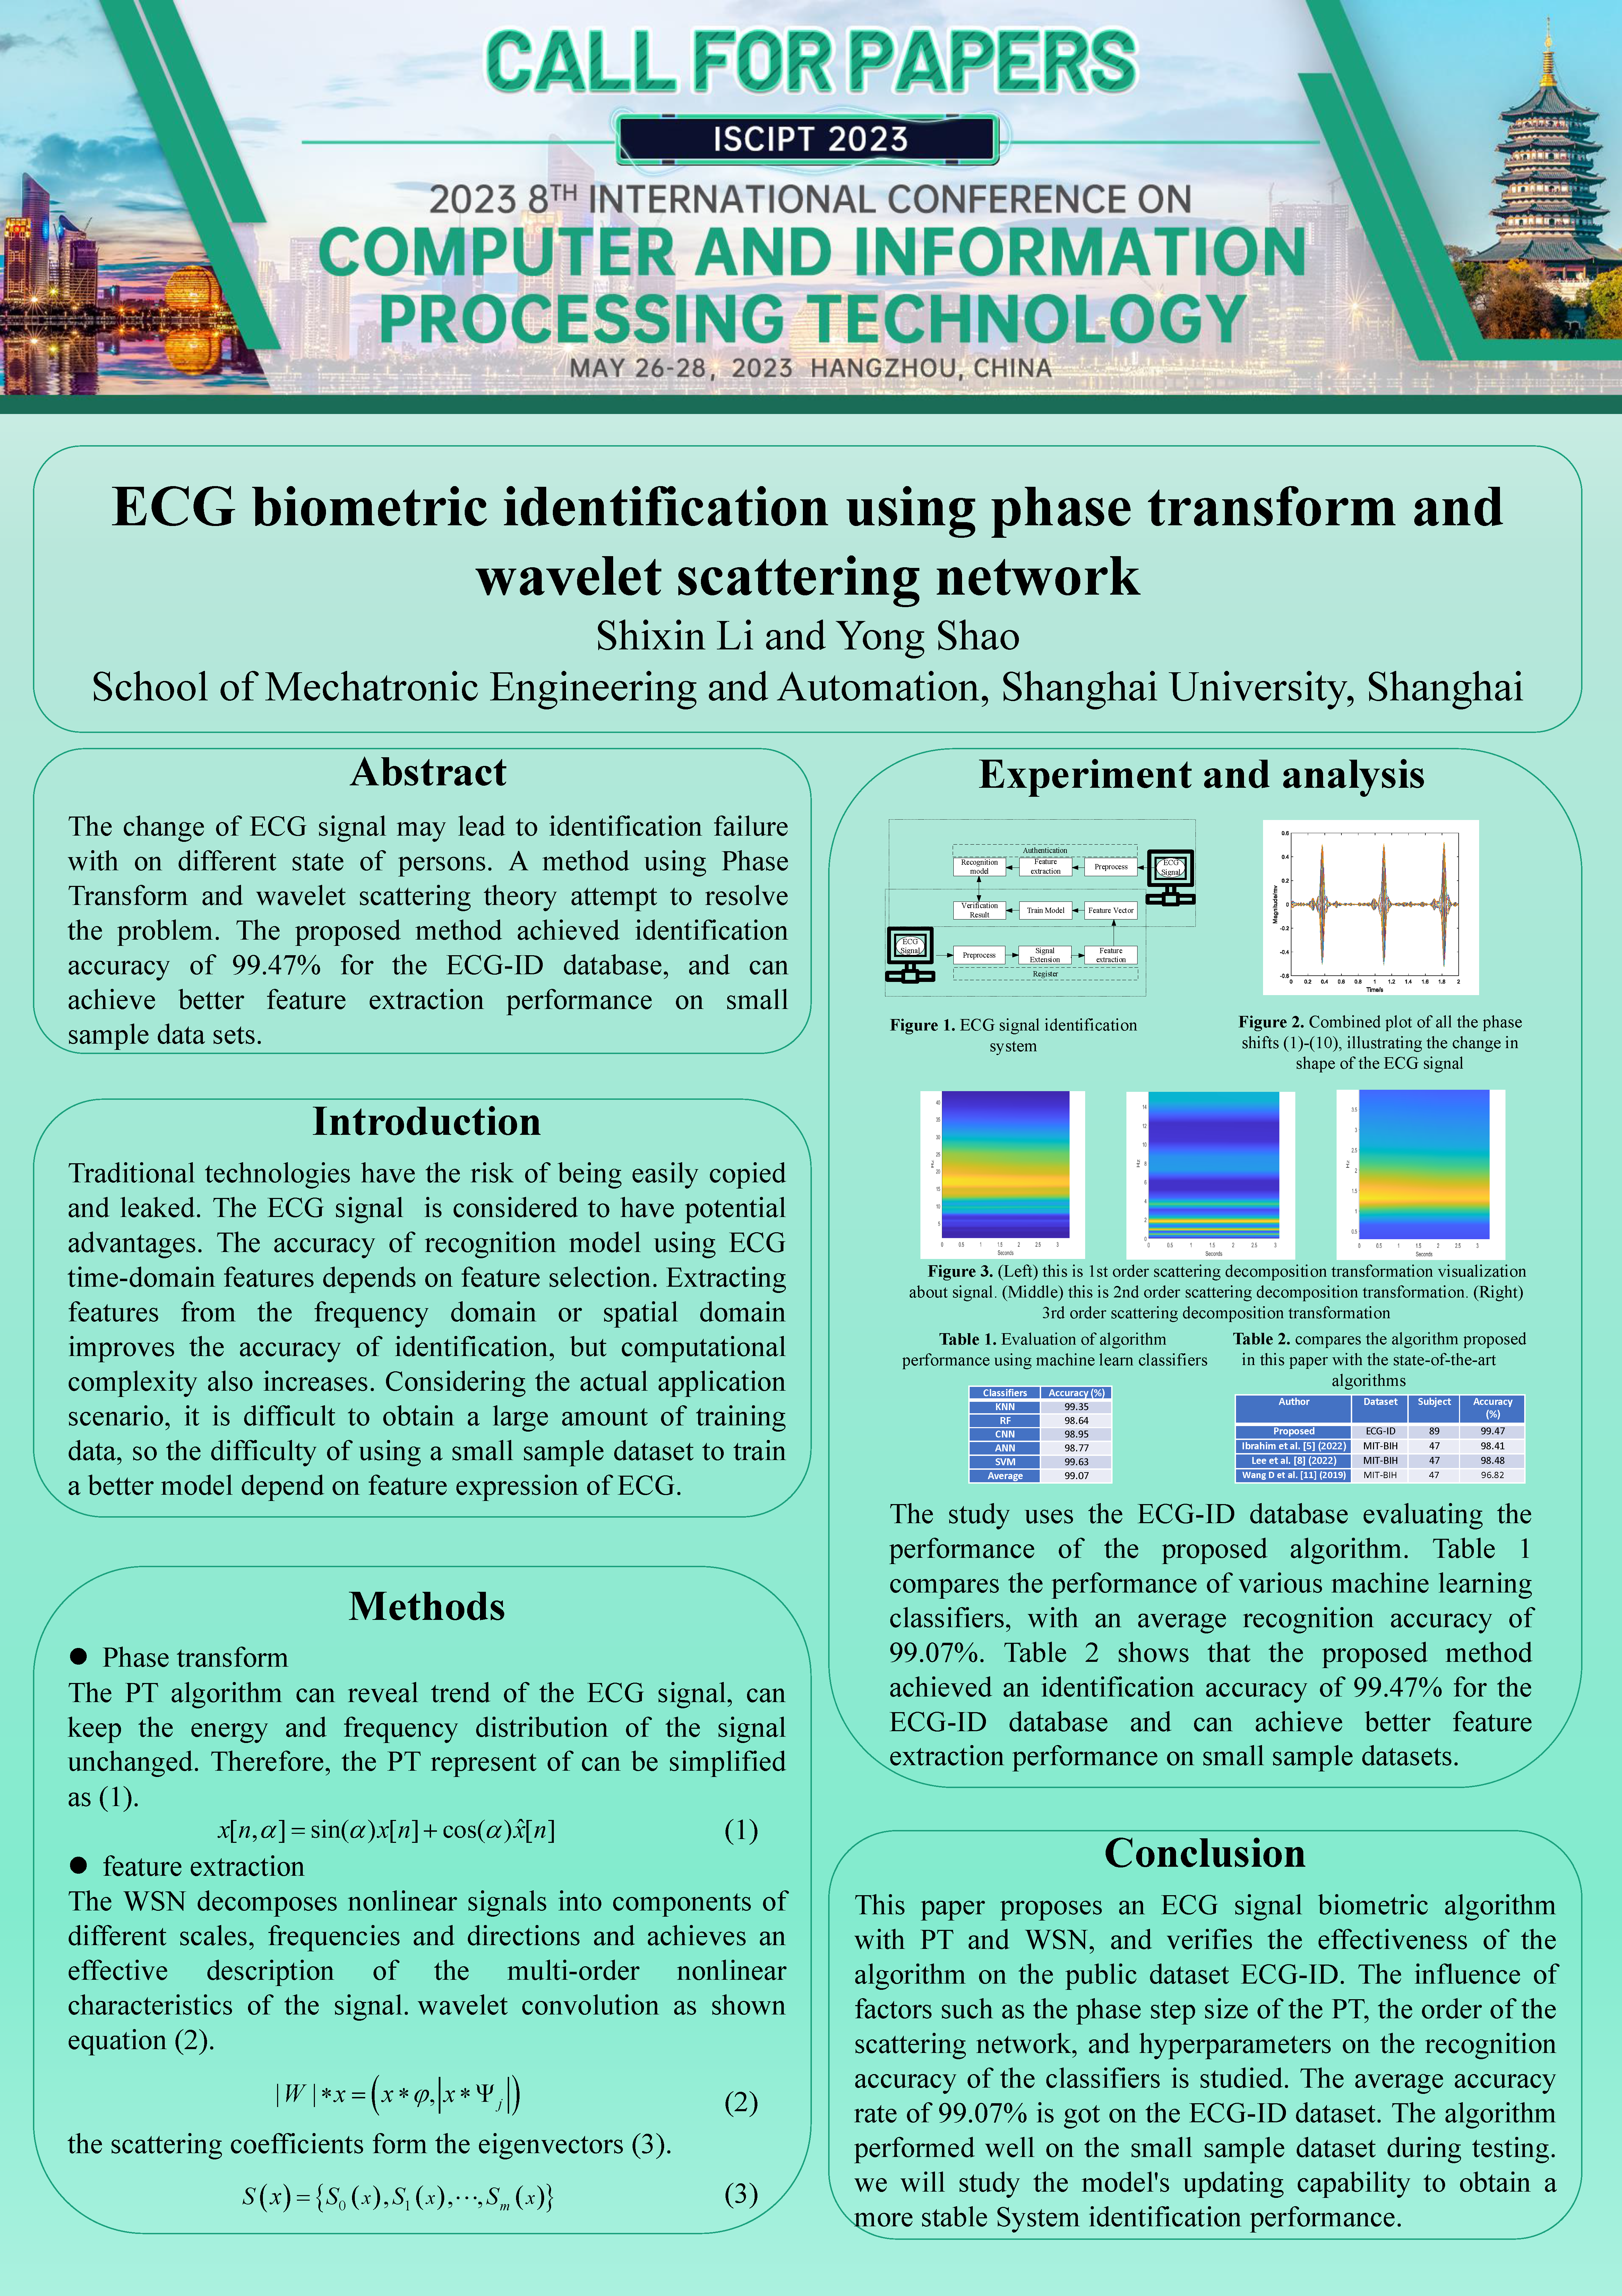 ISCIPT海报展示_ECG Biometric Identification Using Phase Transform and Wavelet Scattering Networ.png